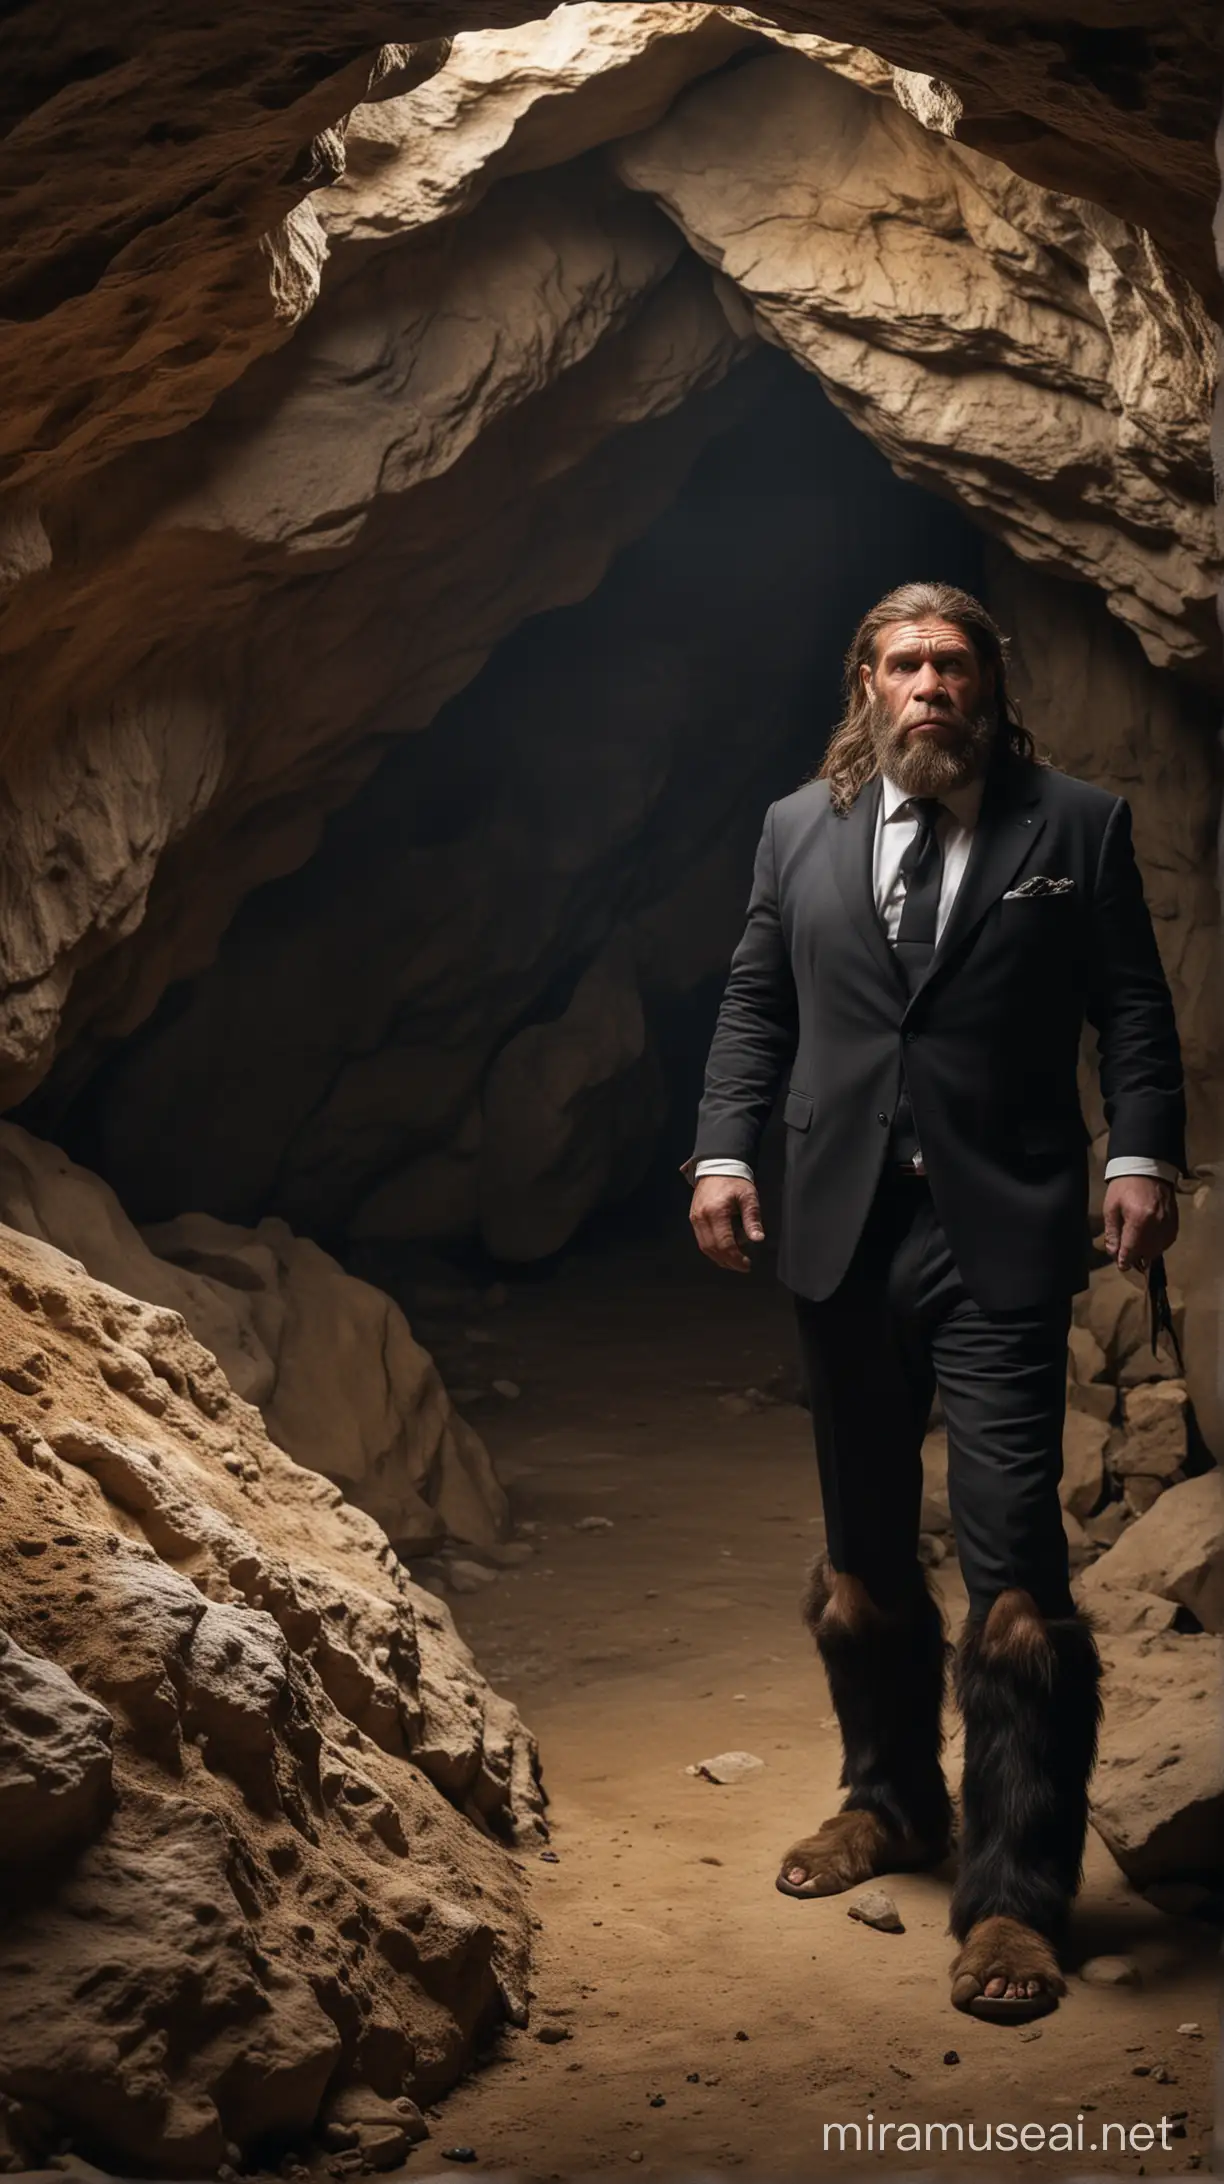 A Neanderthal wearing a suit black in the cave
